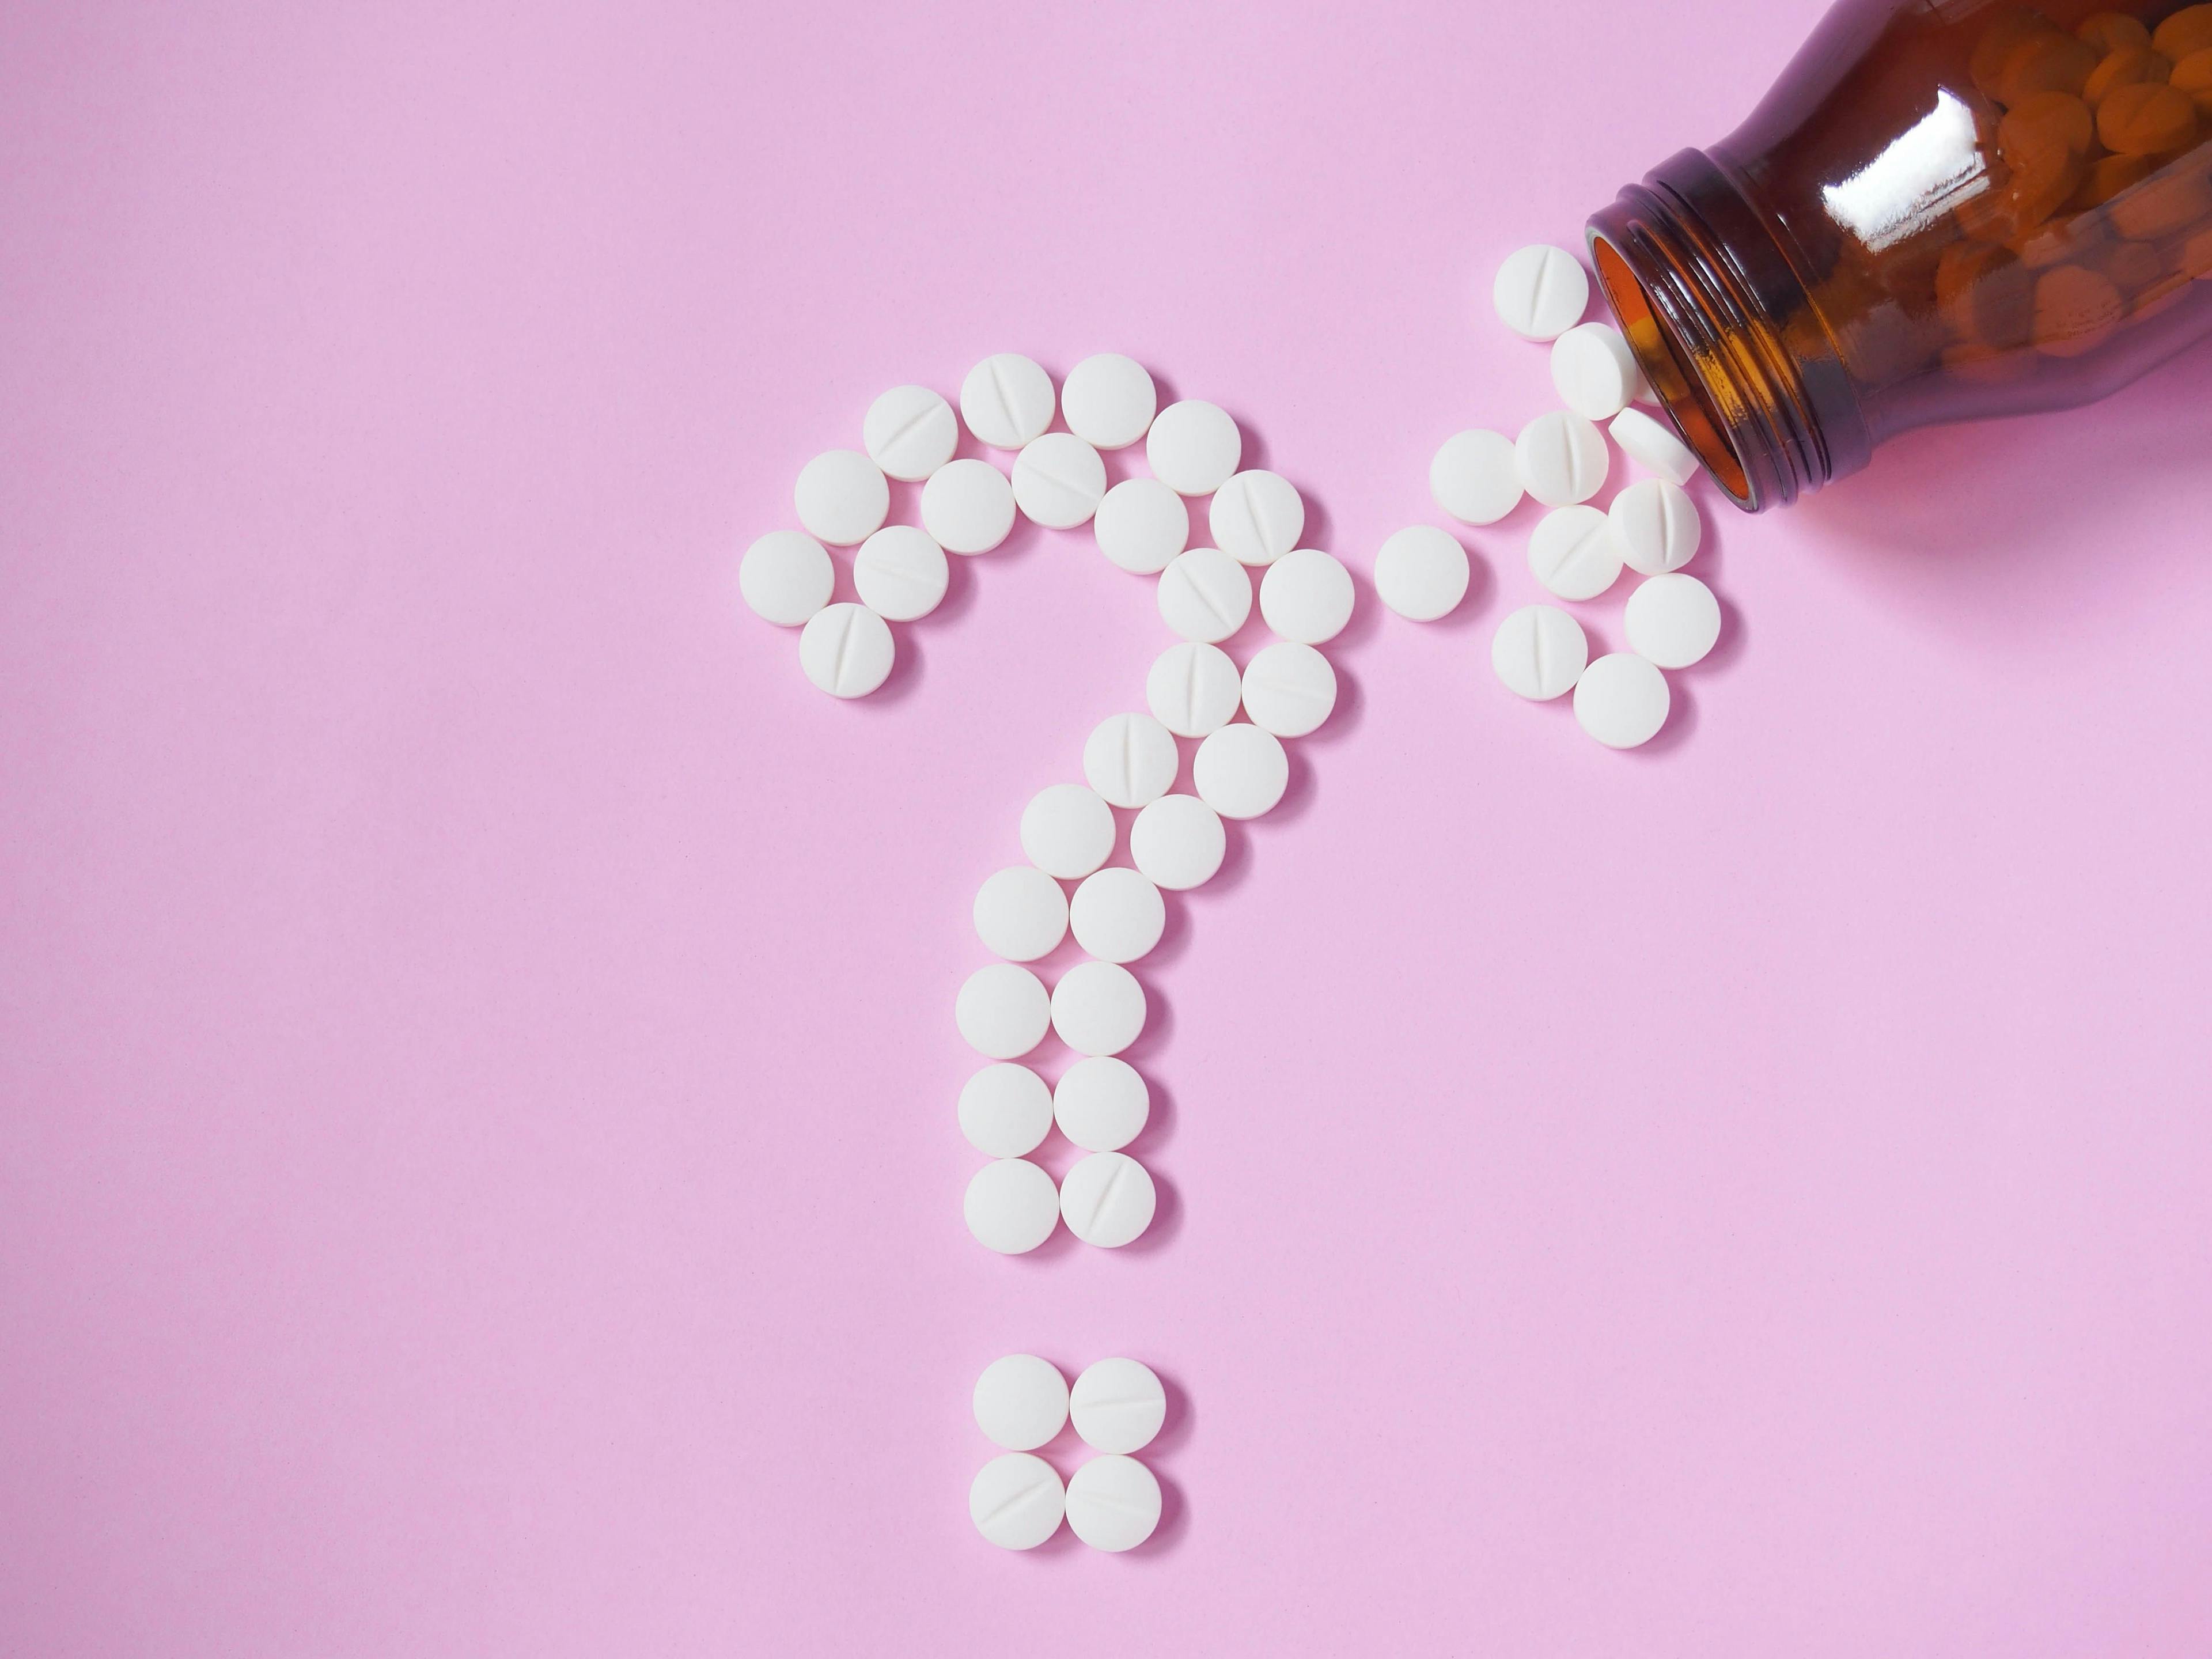 Question mark made by white pills spilling out of brown glass bottle on pink background. Creative medicine for health/medical problem, drug interaction, medication error and pharmaceutical concept - Image credit: Orawan | stock.adobe.com